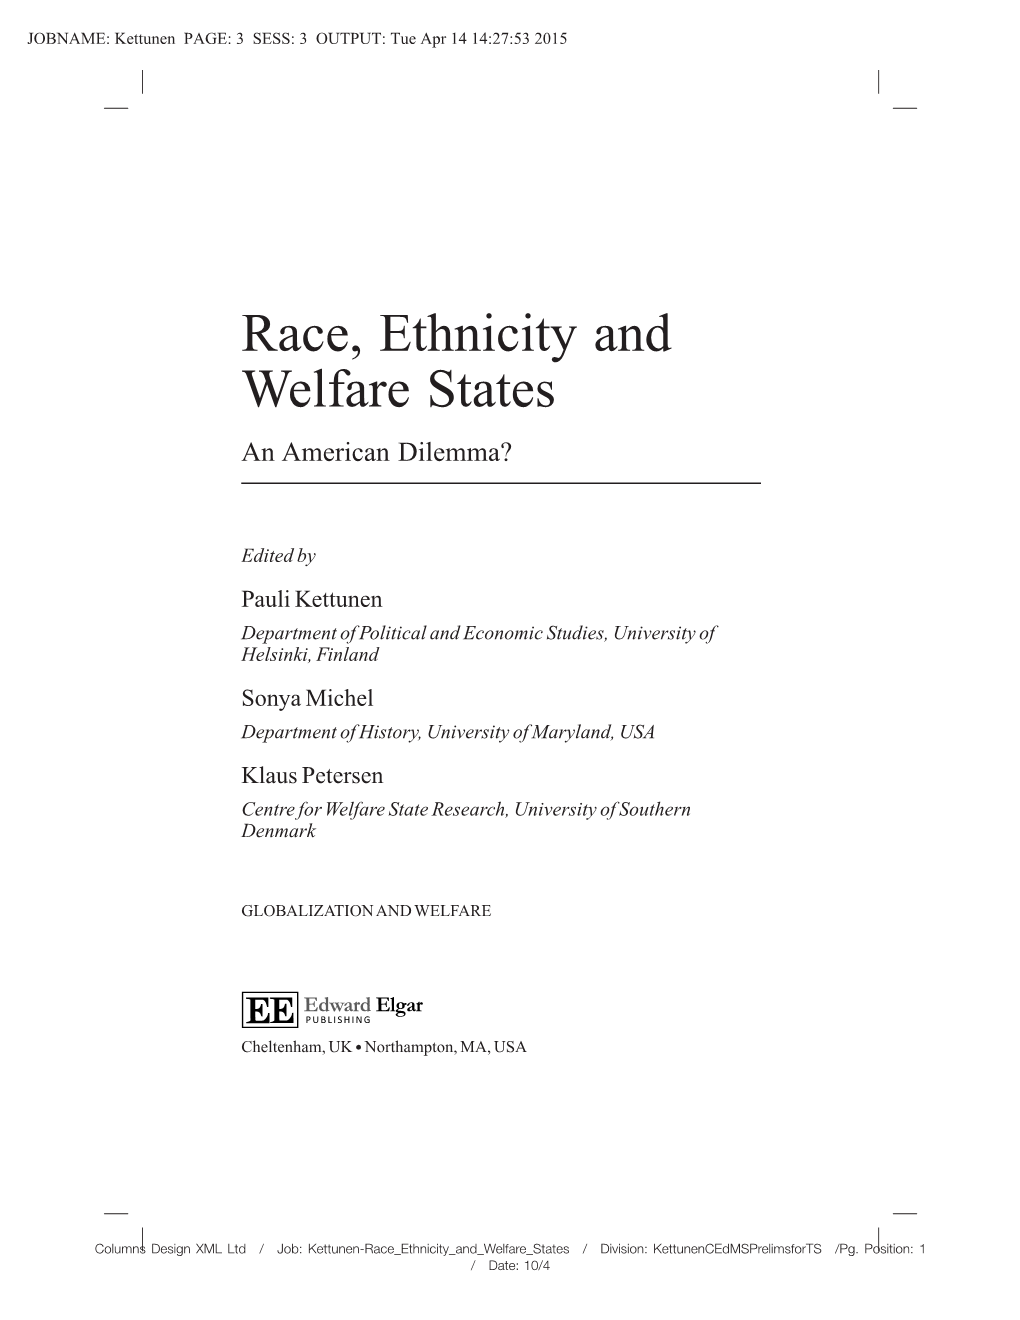 Race, Ethnicity and Welfare States an American Dilemma?